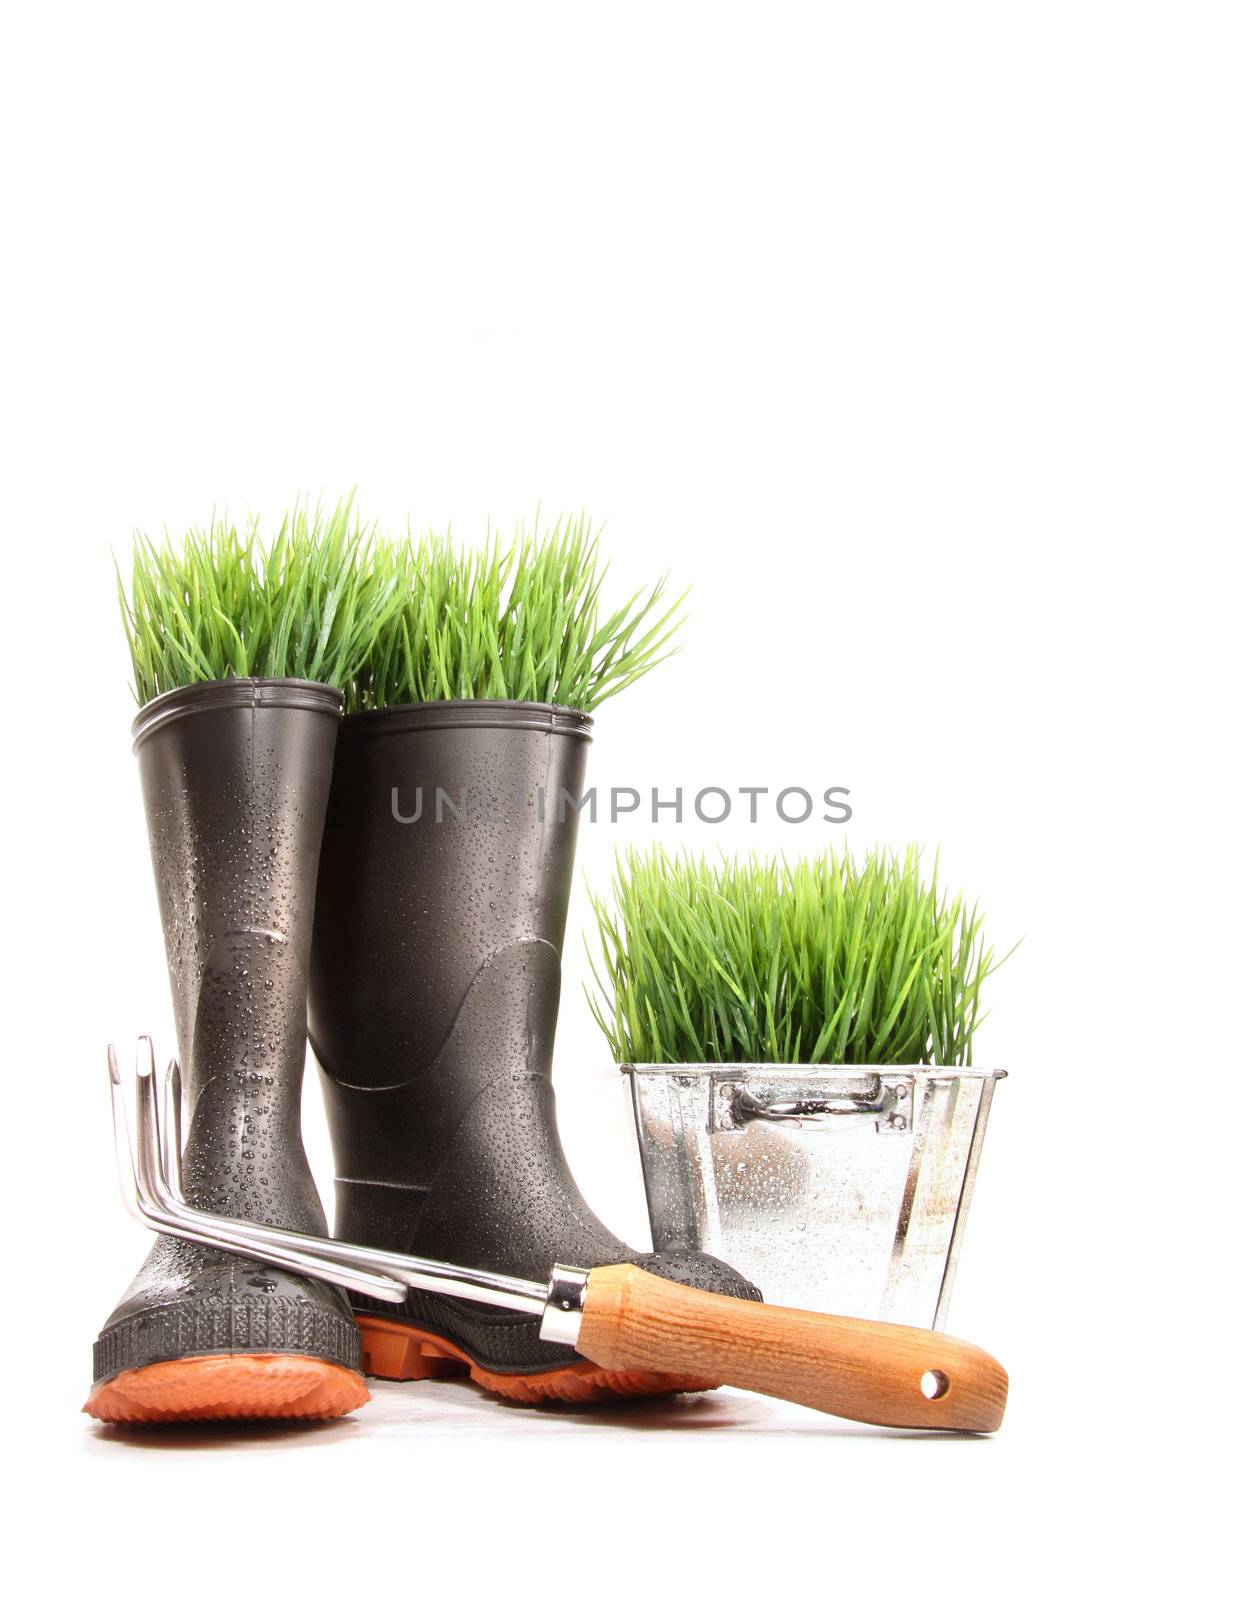 Rubber boots with grass in pot and tool  by Sandralise